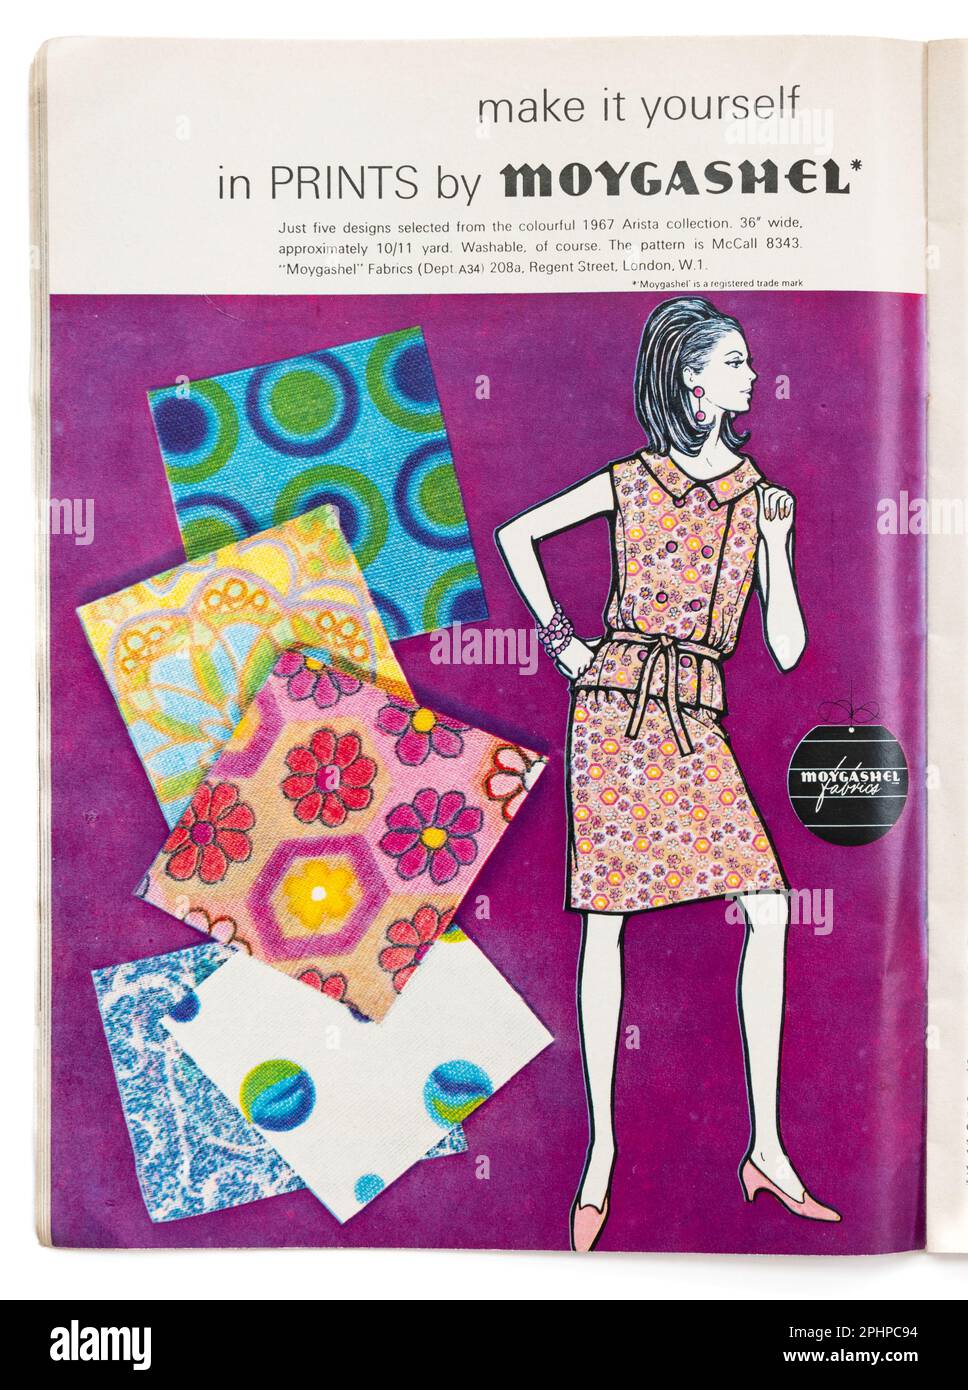 Moygashel fabric advertisement in Womans Realm Home Sewing and Knitting magazine April 1967 Stock Photo